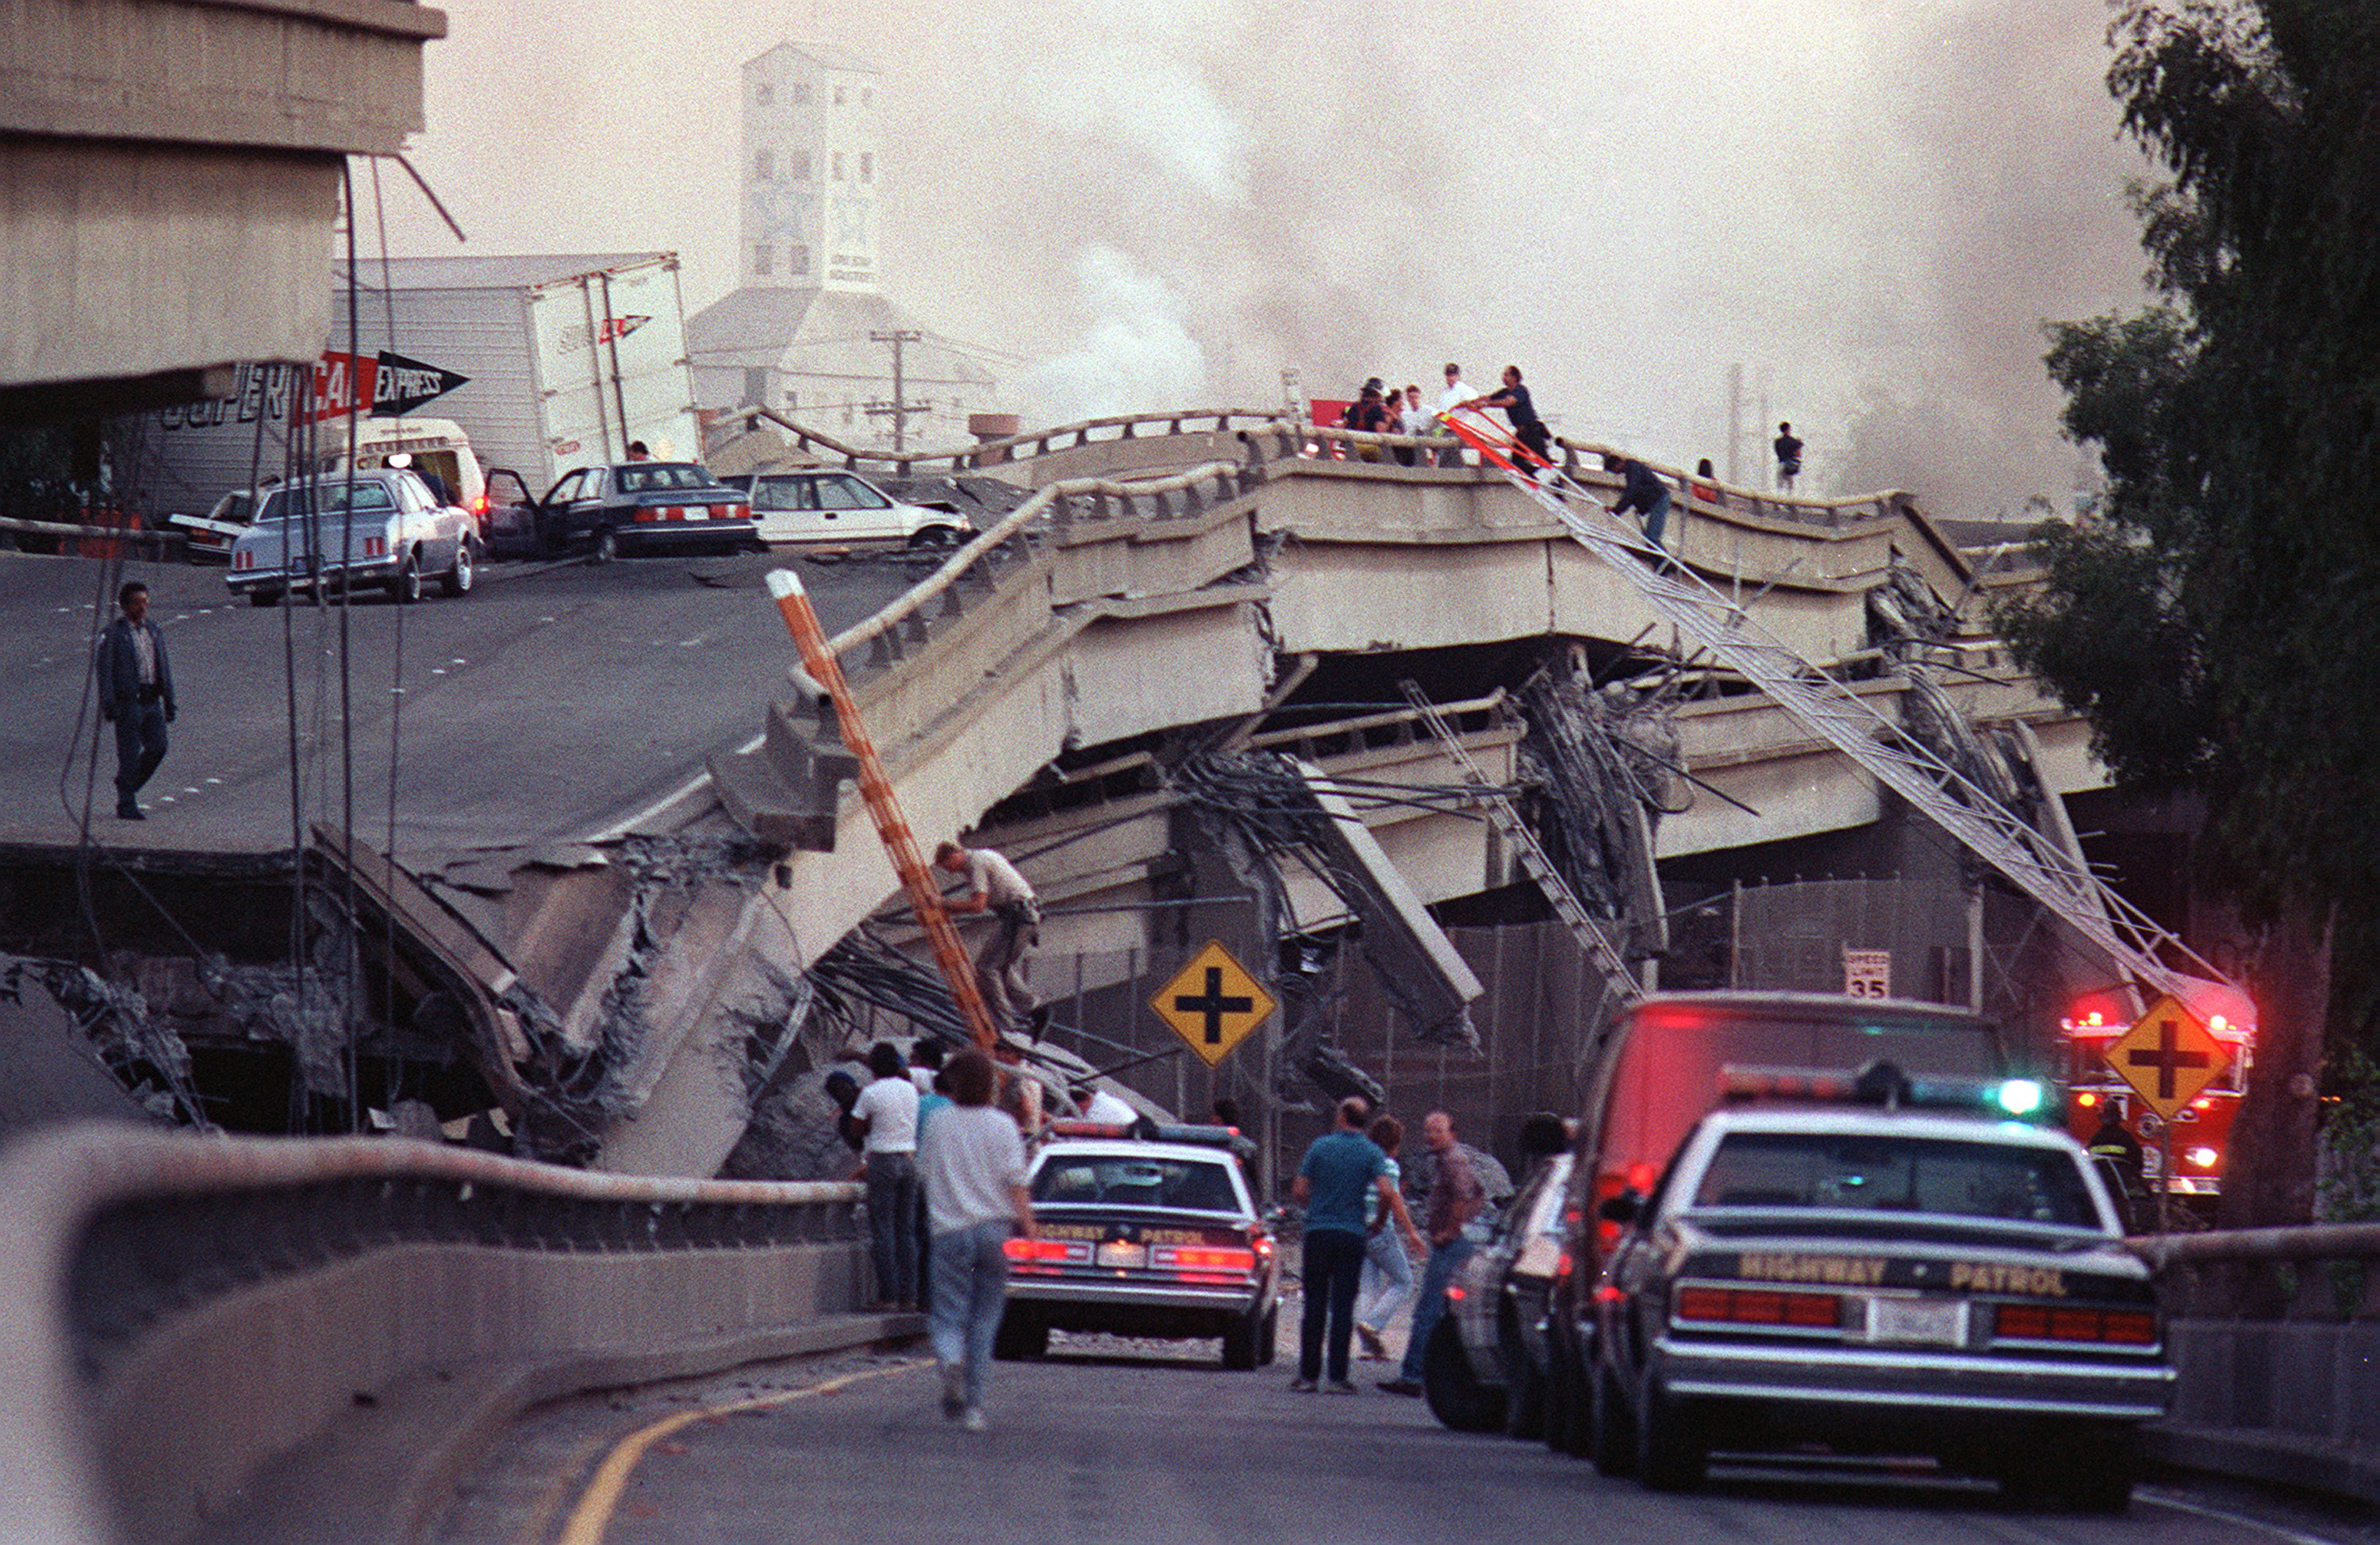 30 Years After Loma Prieta Earthquake, Doctor Reflects On ”Miracle” Rescue